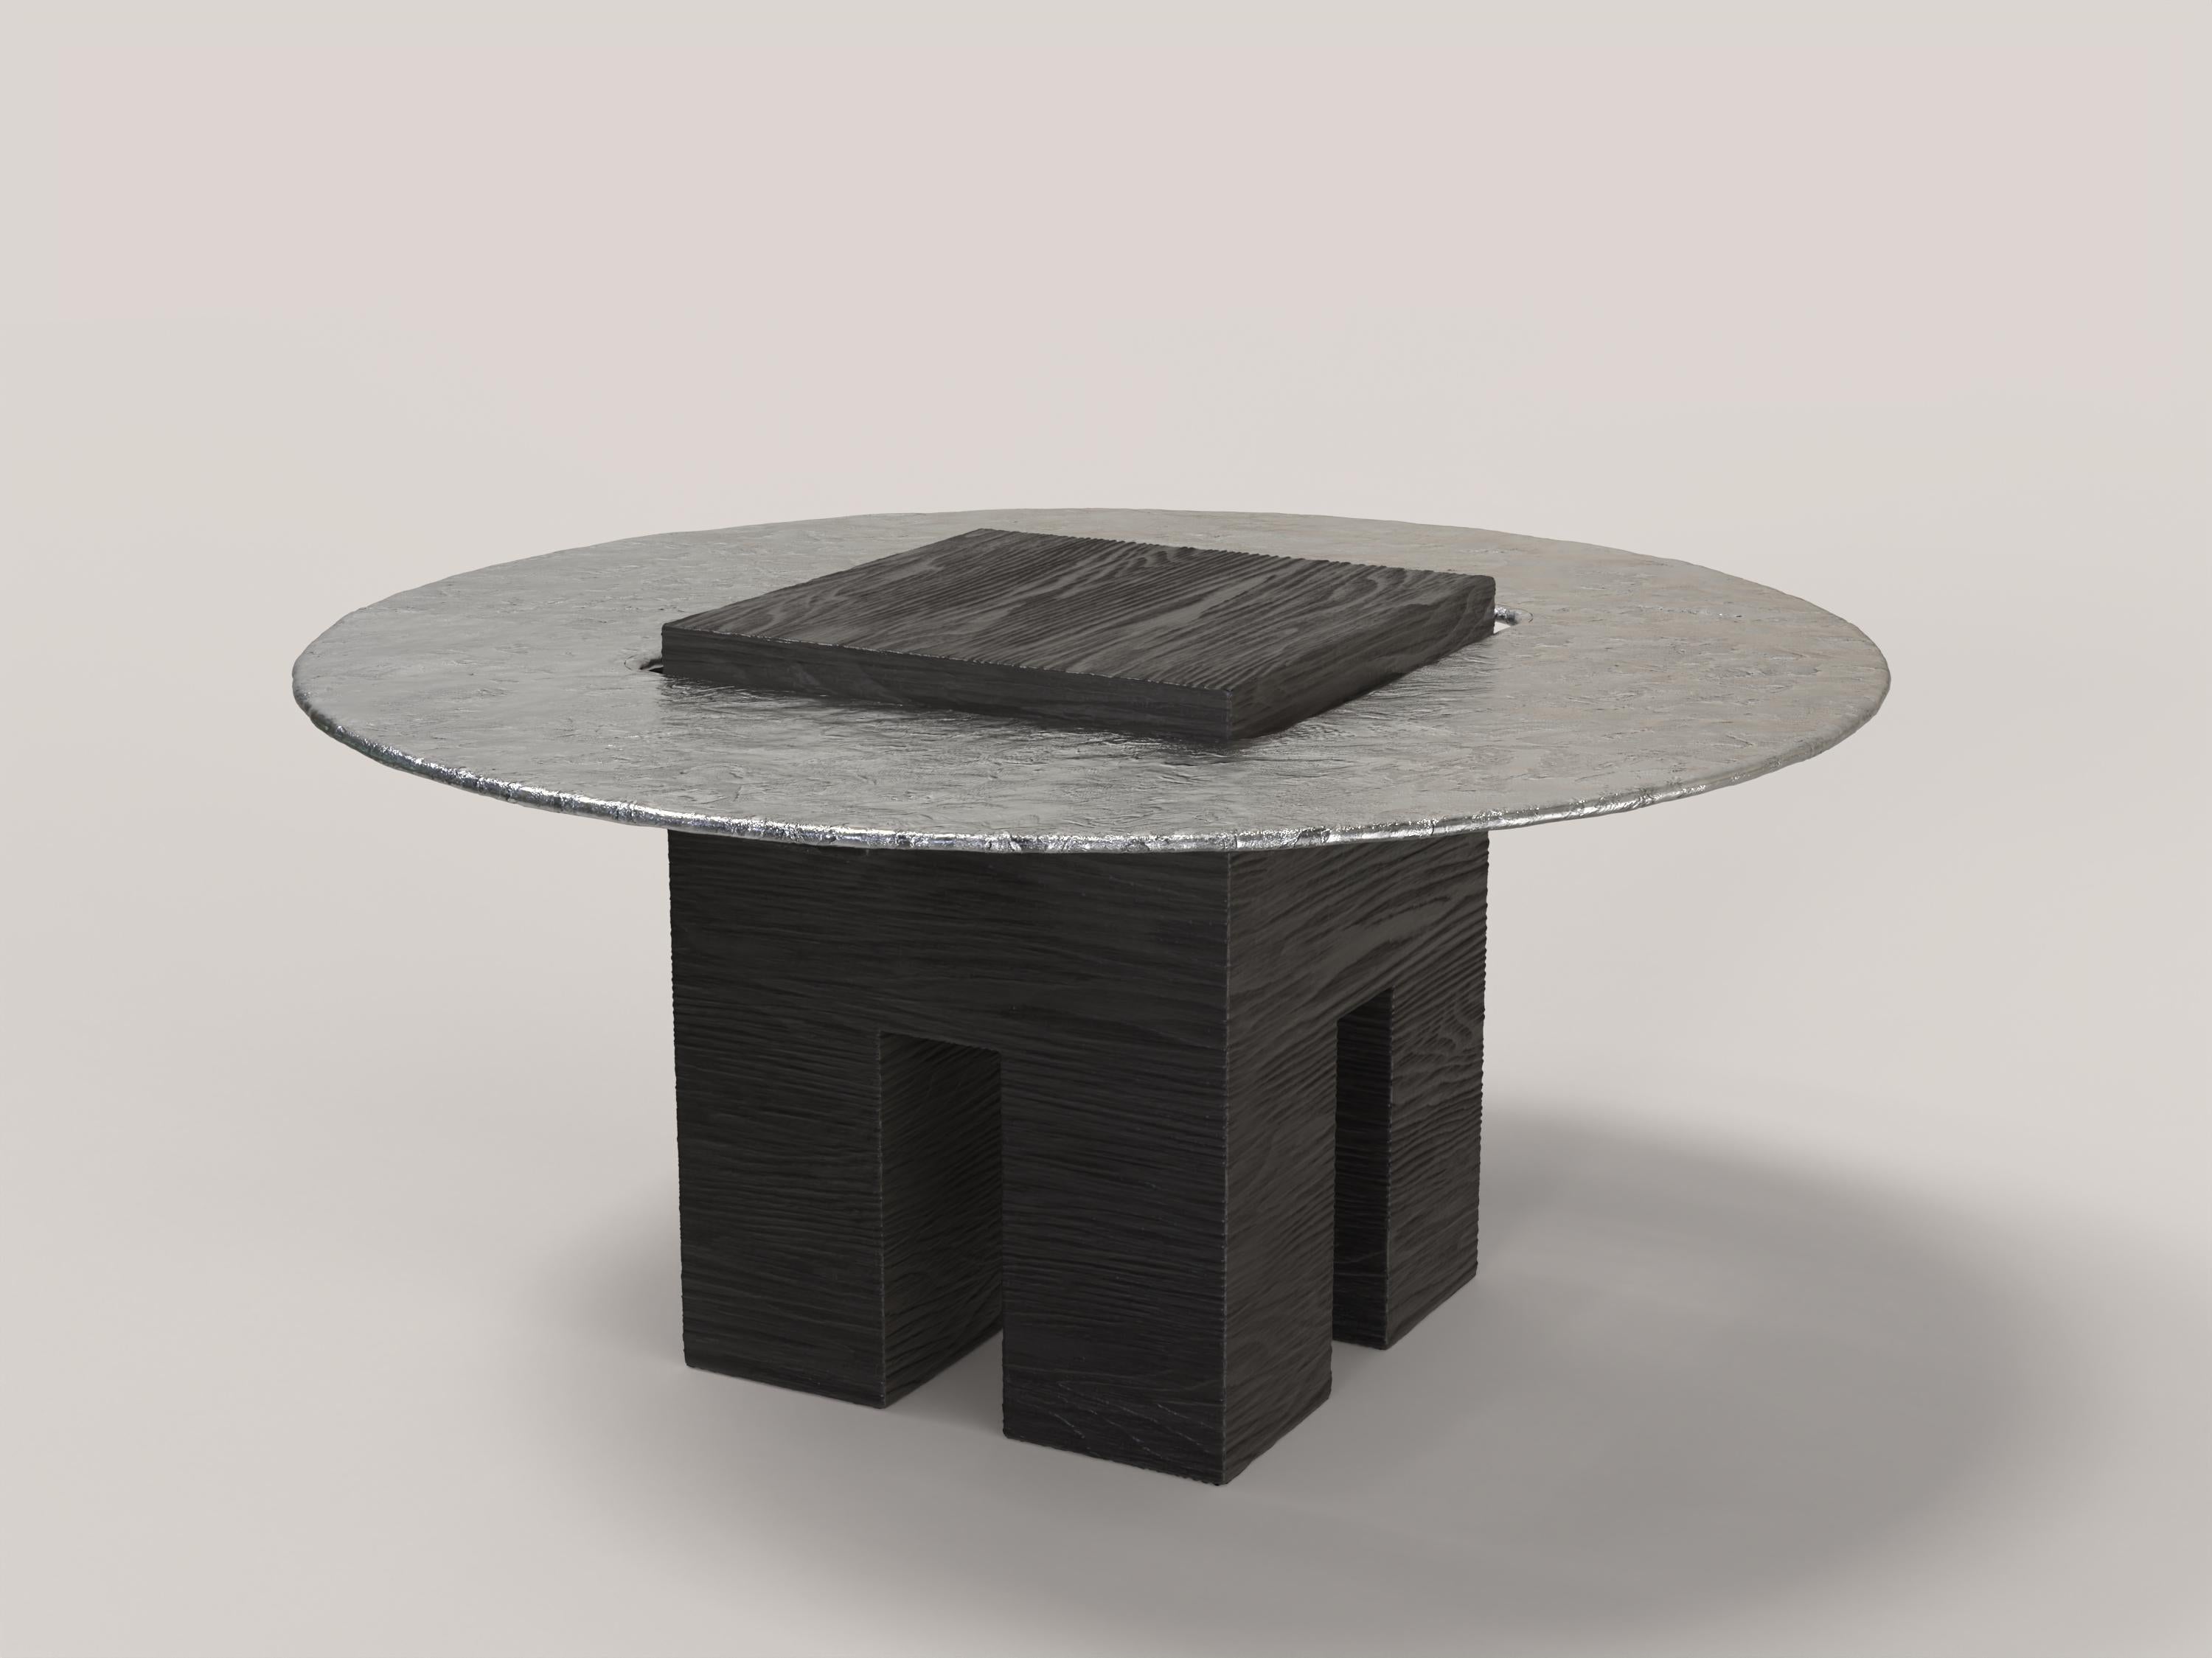 Tempio V1 Low Table by Edizione Limitata
Limited Edition of 150 pieces. Signed and numbered.
Dimensions: D 82 x W 82 x H 40 cm
Materials: Colored oak wood and cast aluminum. 

Tempio is a collection of contemporary sculptural table made by Italian